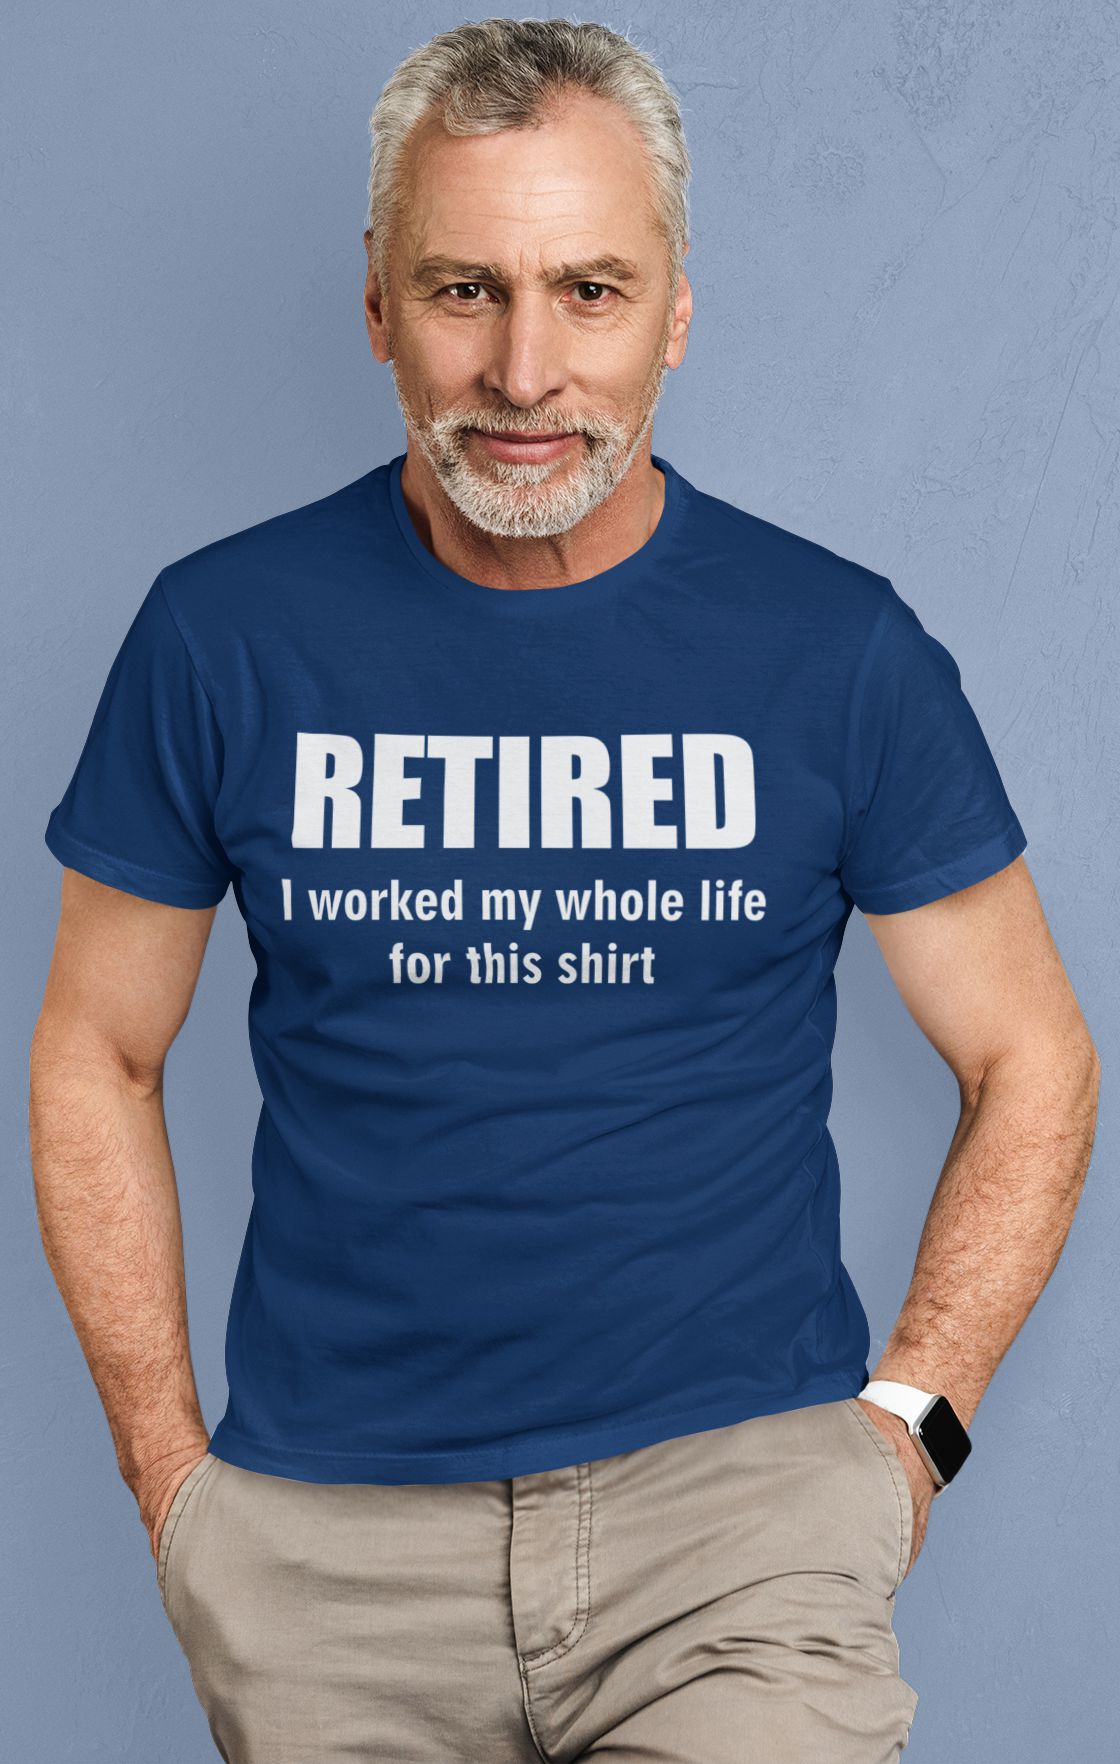 RETIRED, I worked my whole life for this shirt Adult T-Shirt (#920-1)